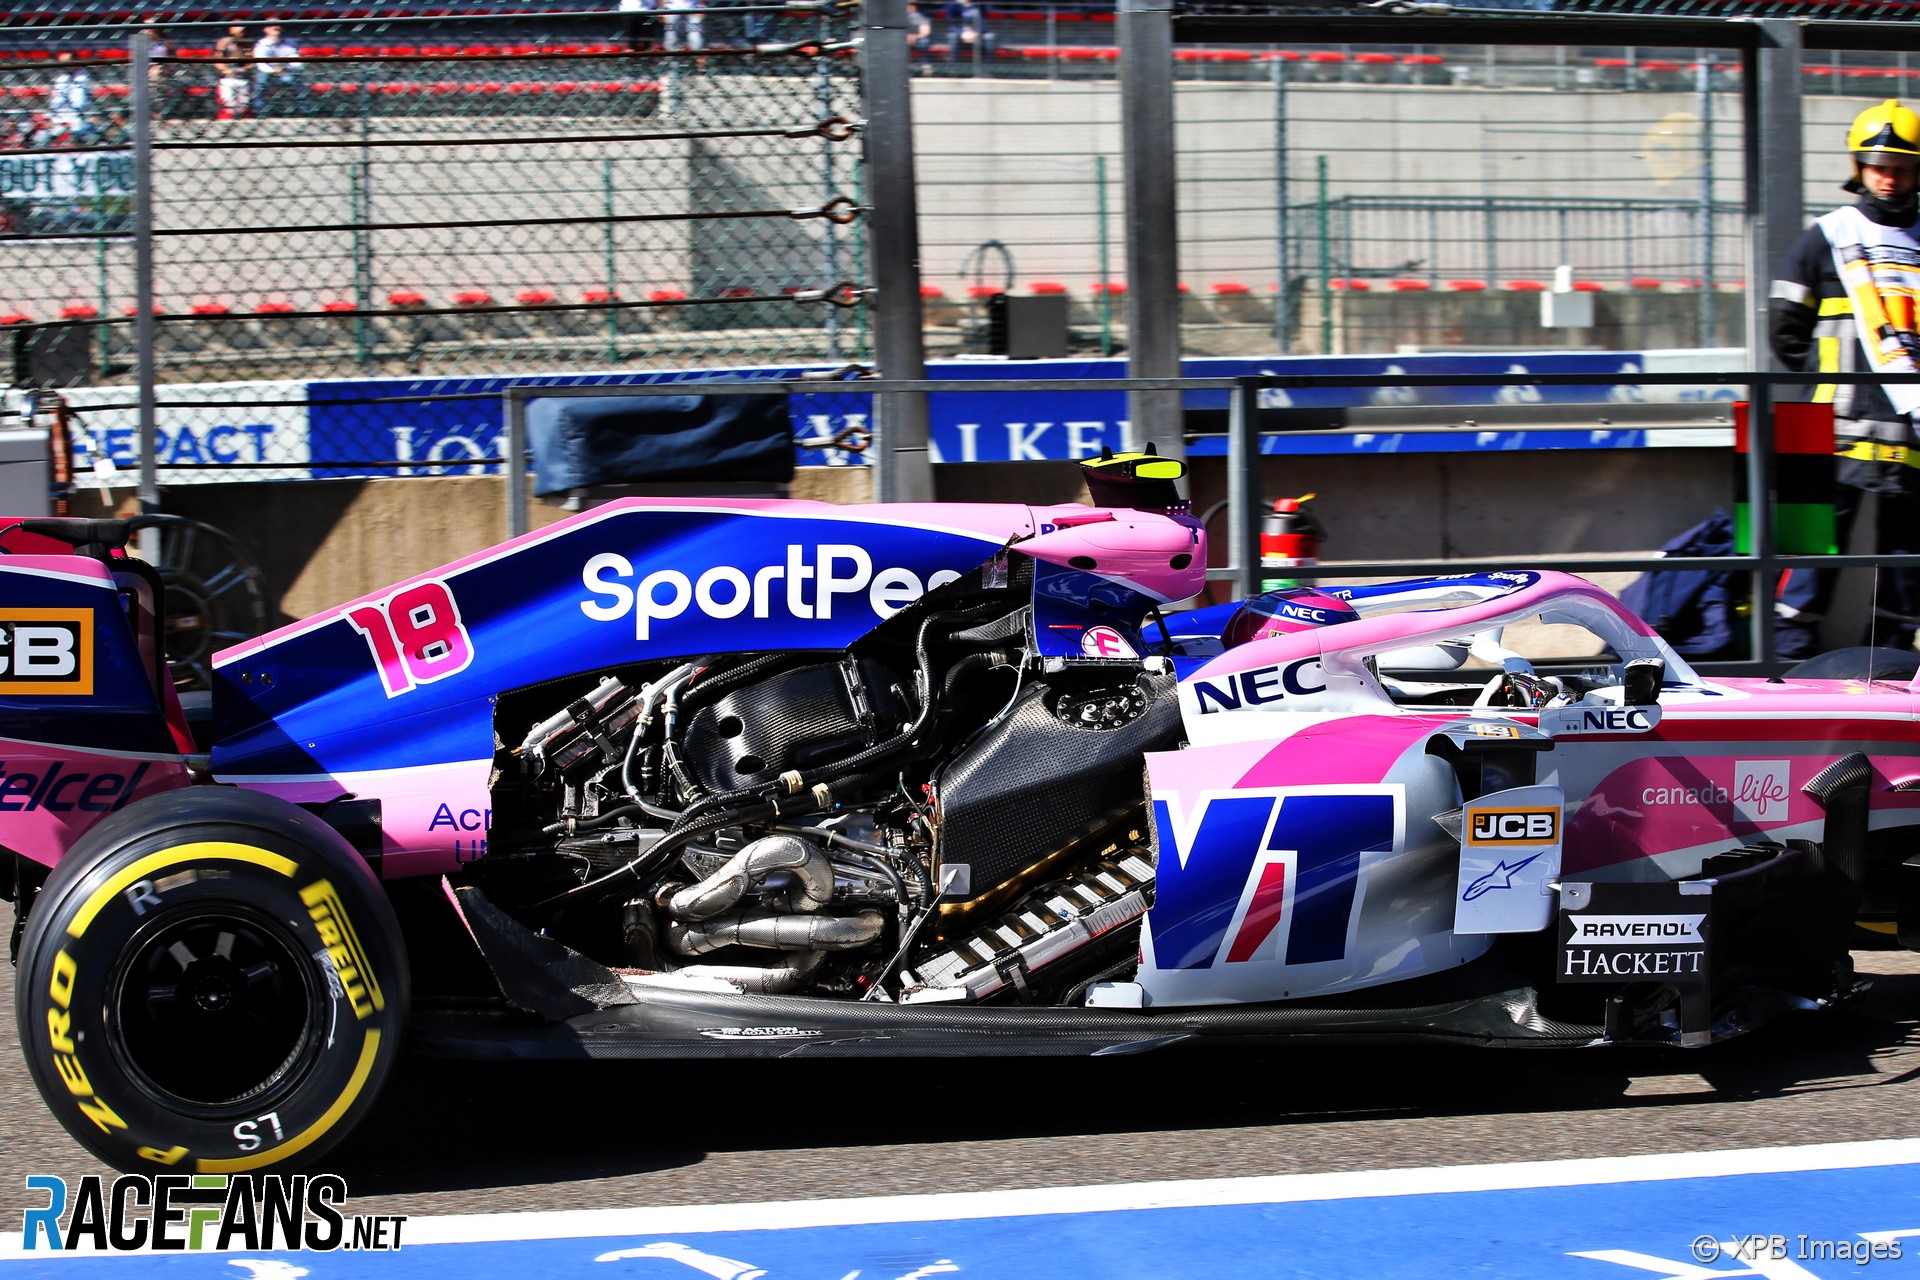 Lance Stroll, Racing Point, Spa-Francorchamps, 2019